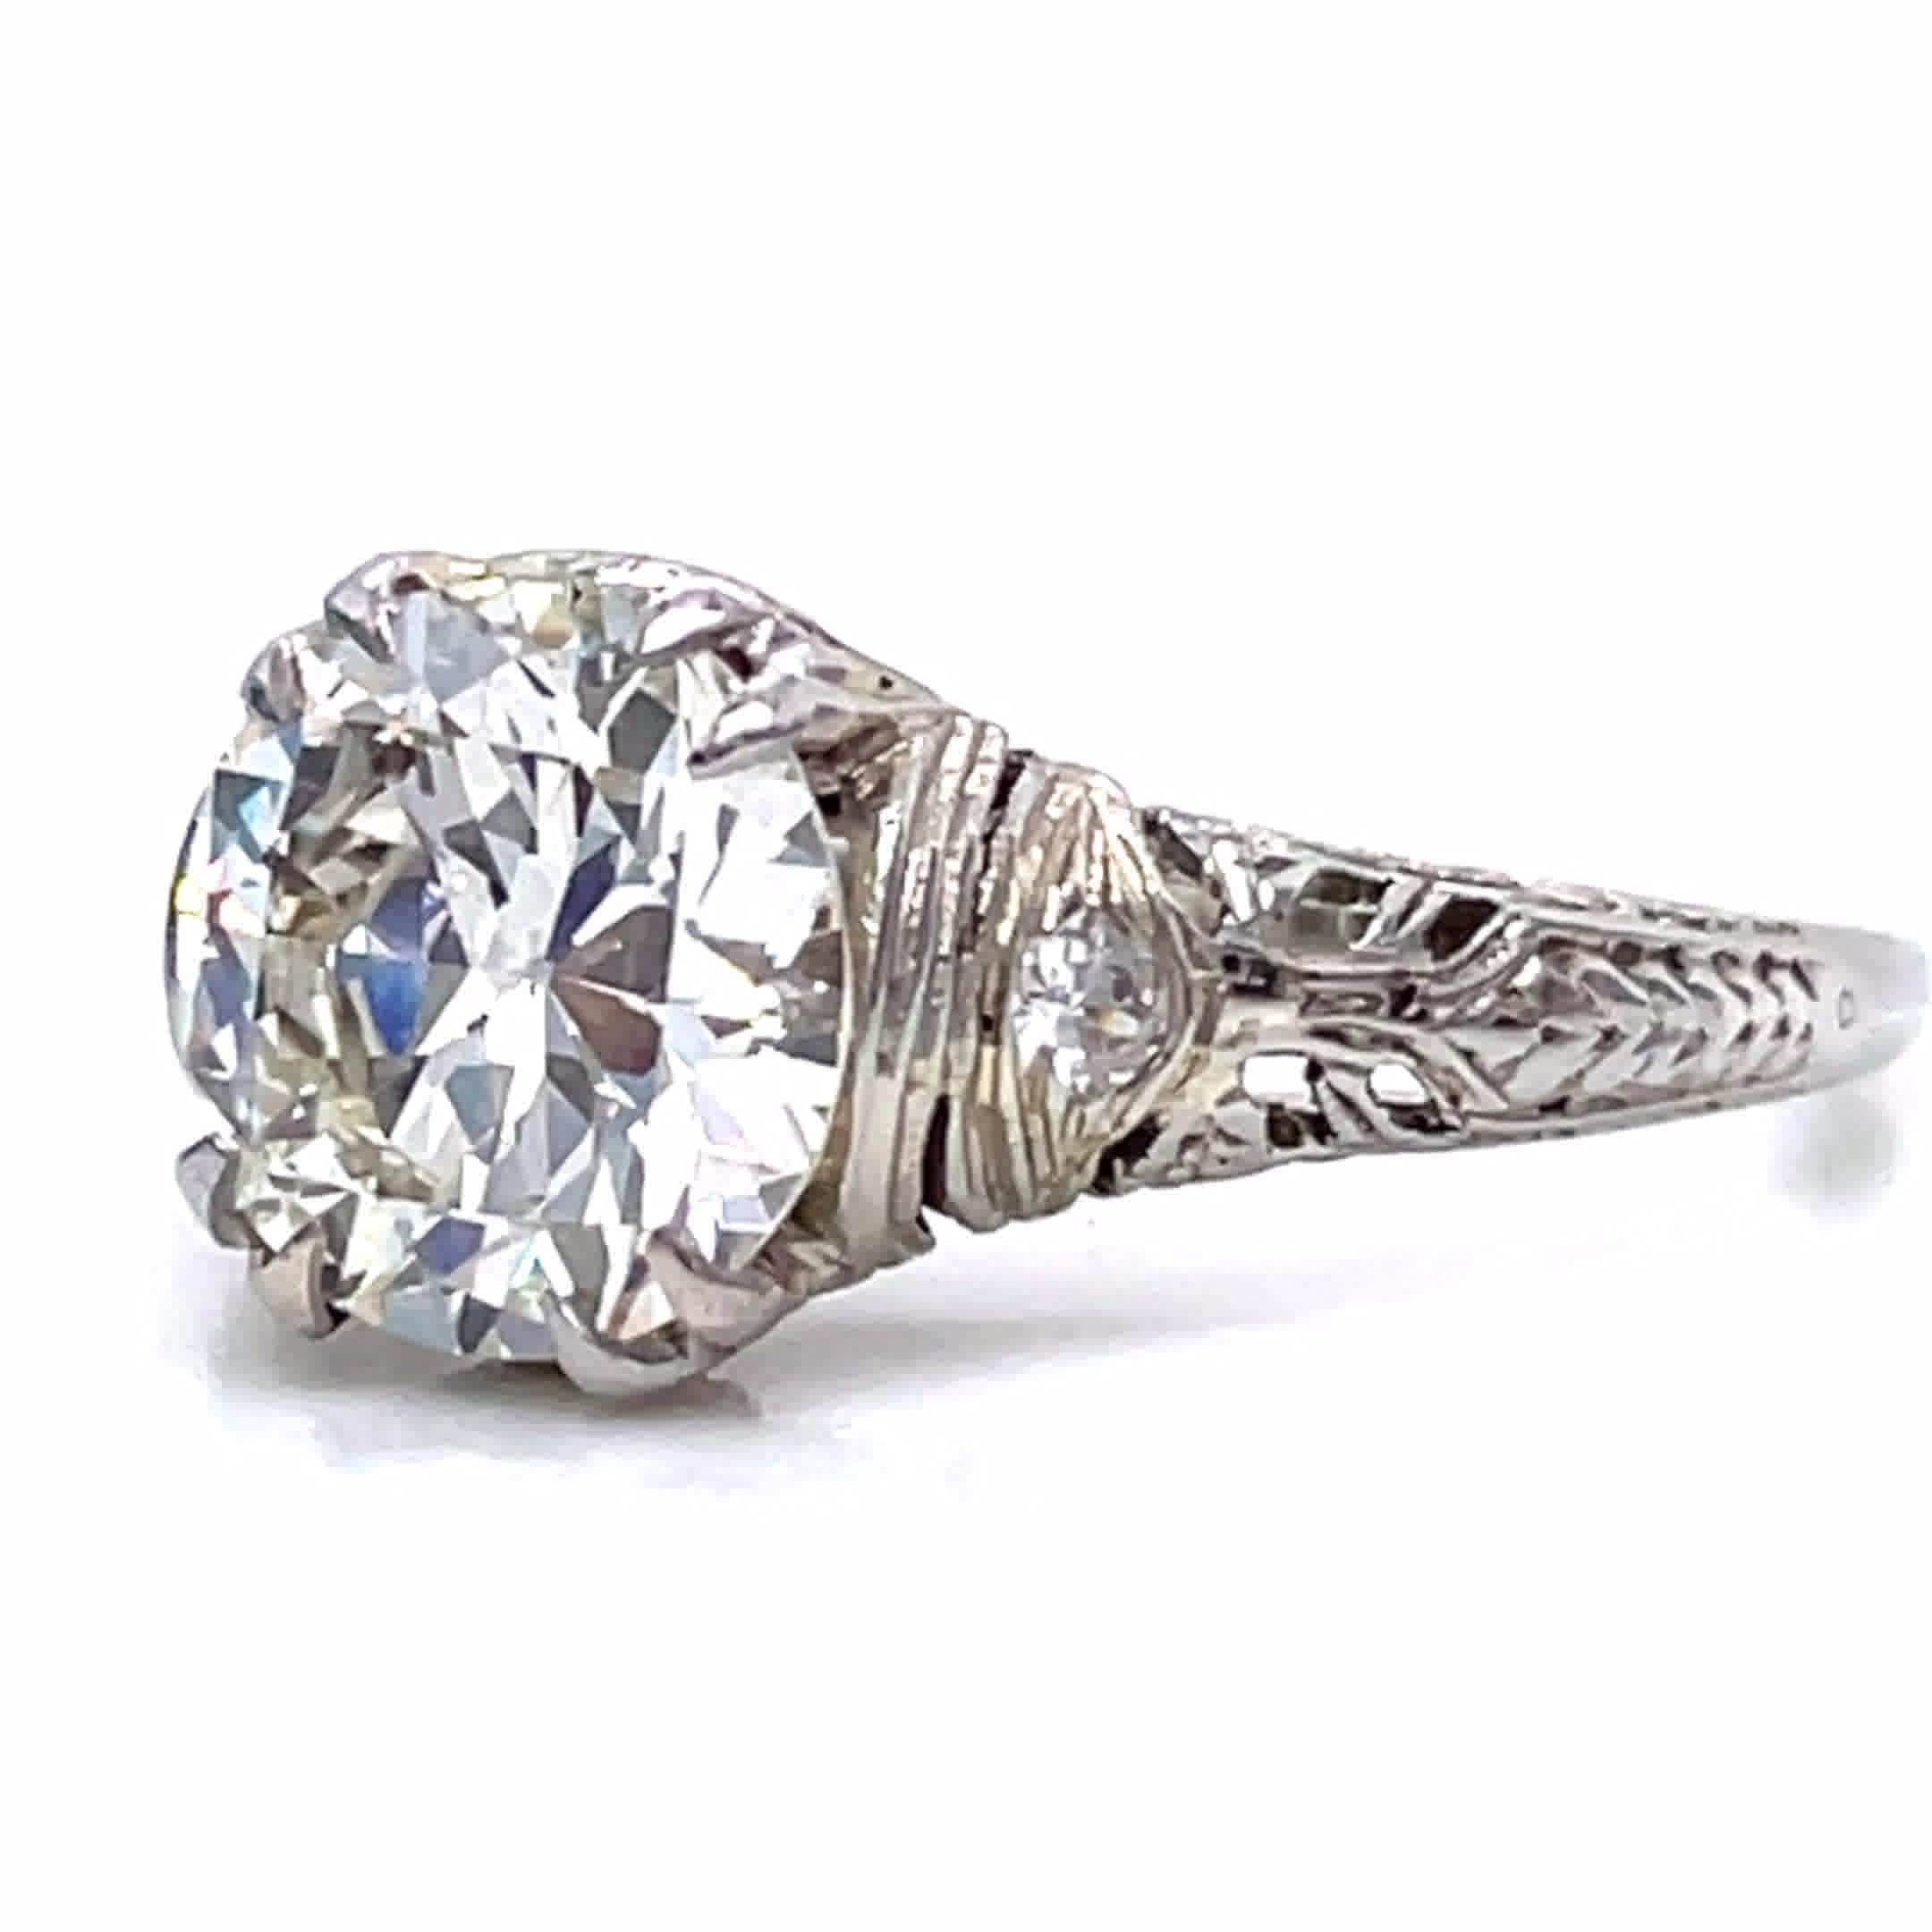 Are you on a hunt for the most precious and delicate Art Deco ring; consider this Art Deco GIA certified 2.02 carat Old European Cut Diamond Platinum Scottish Thistle Engagement Ring. Adorned with intricate, flowery detail, the ring is feminine and